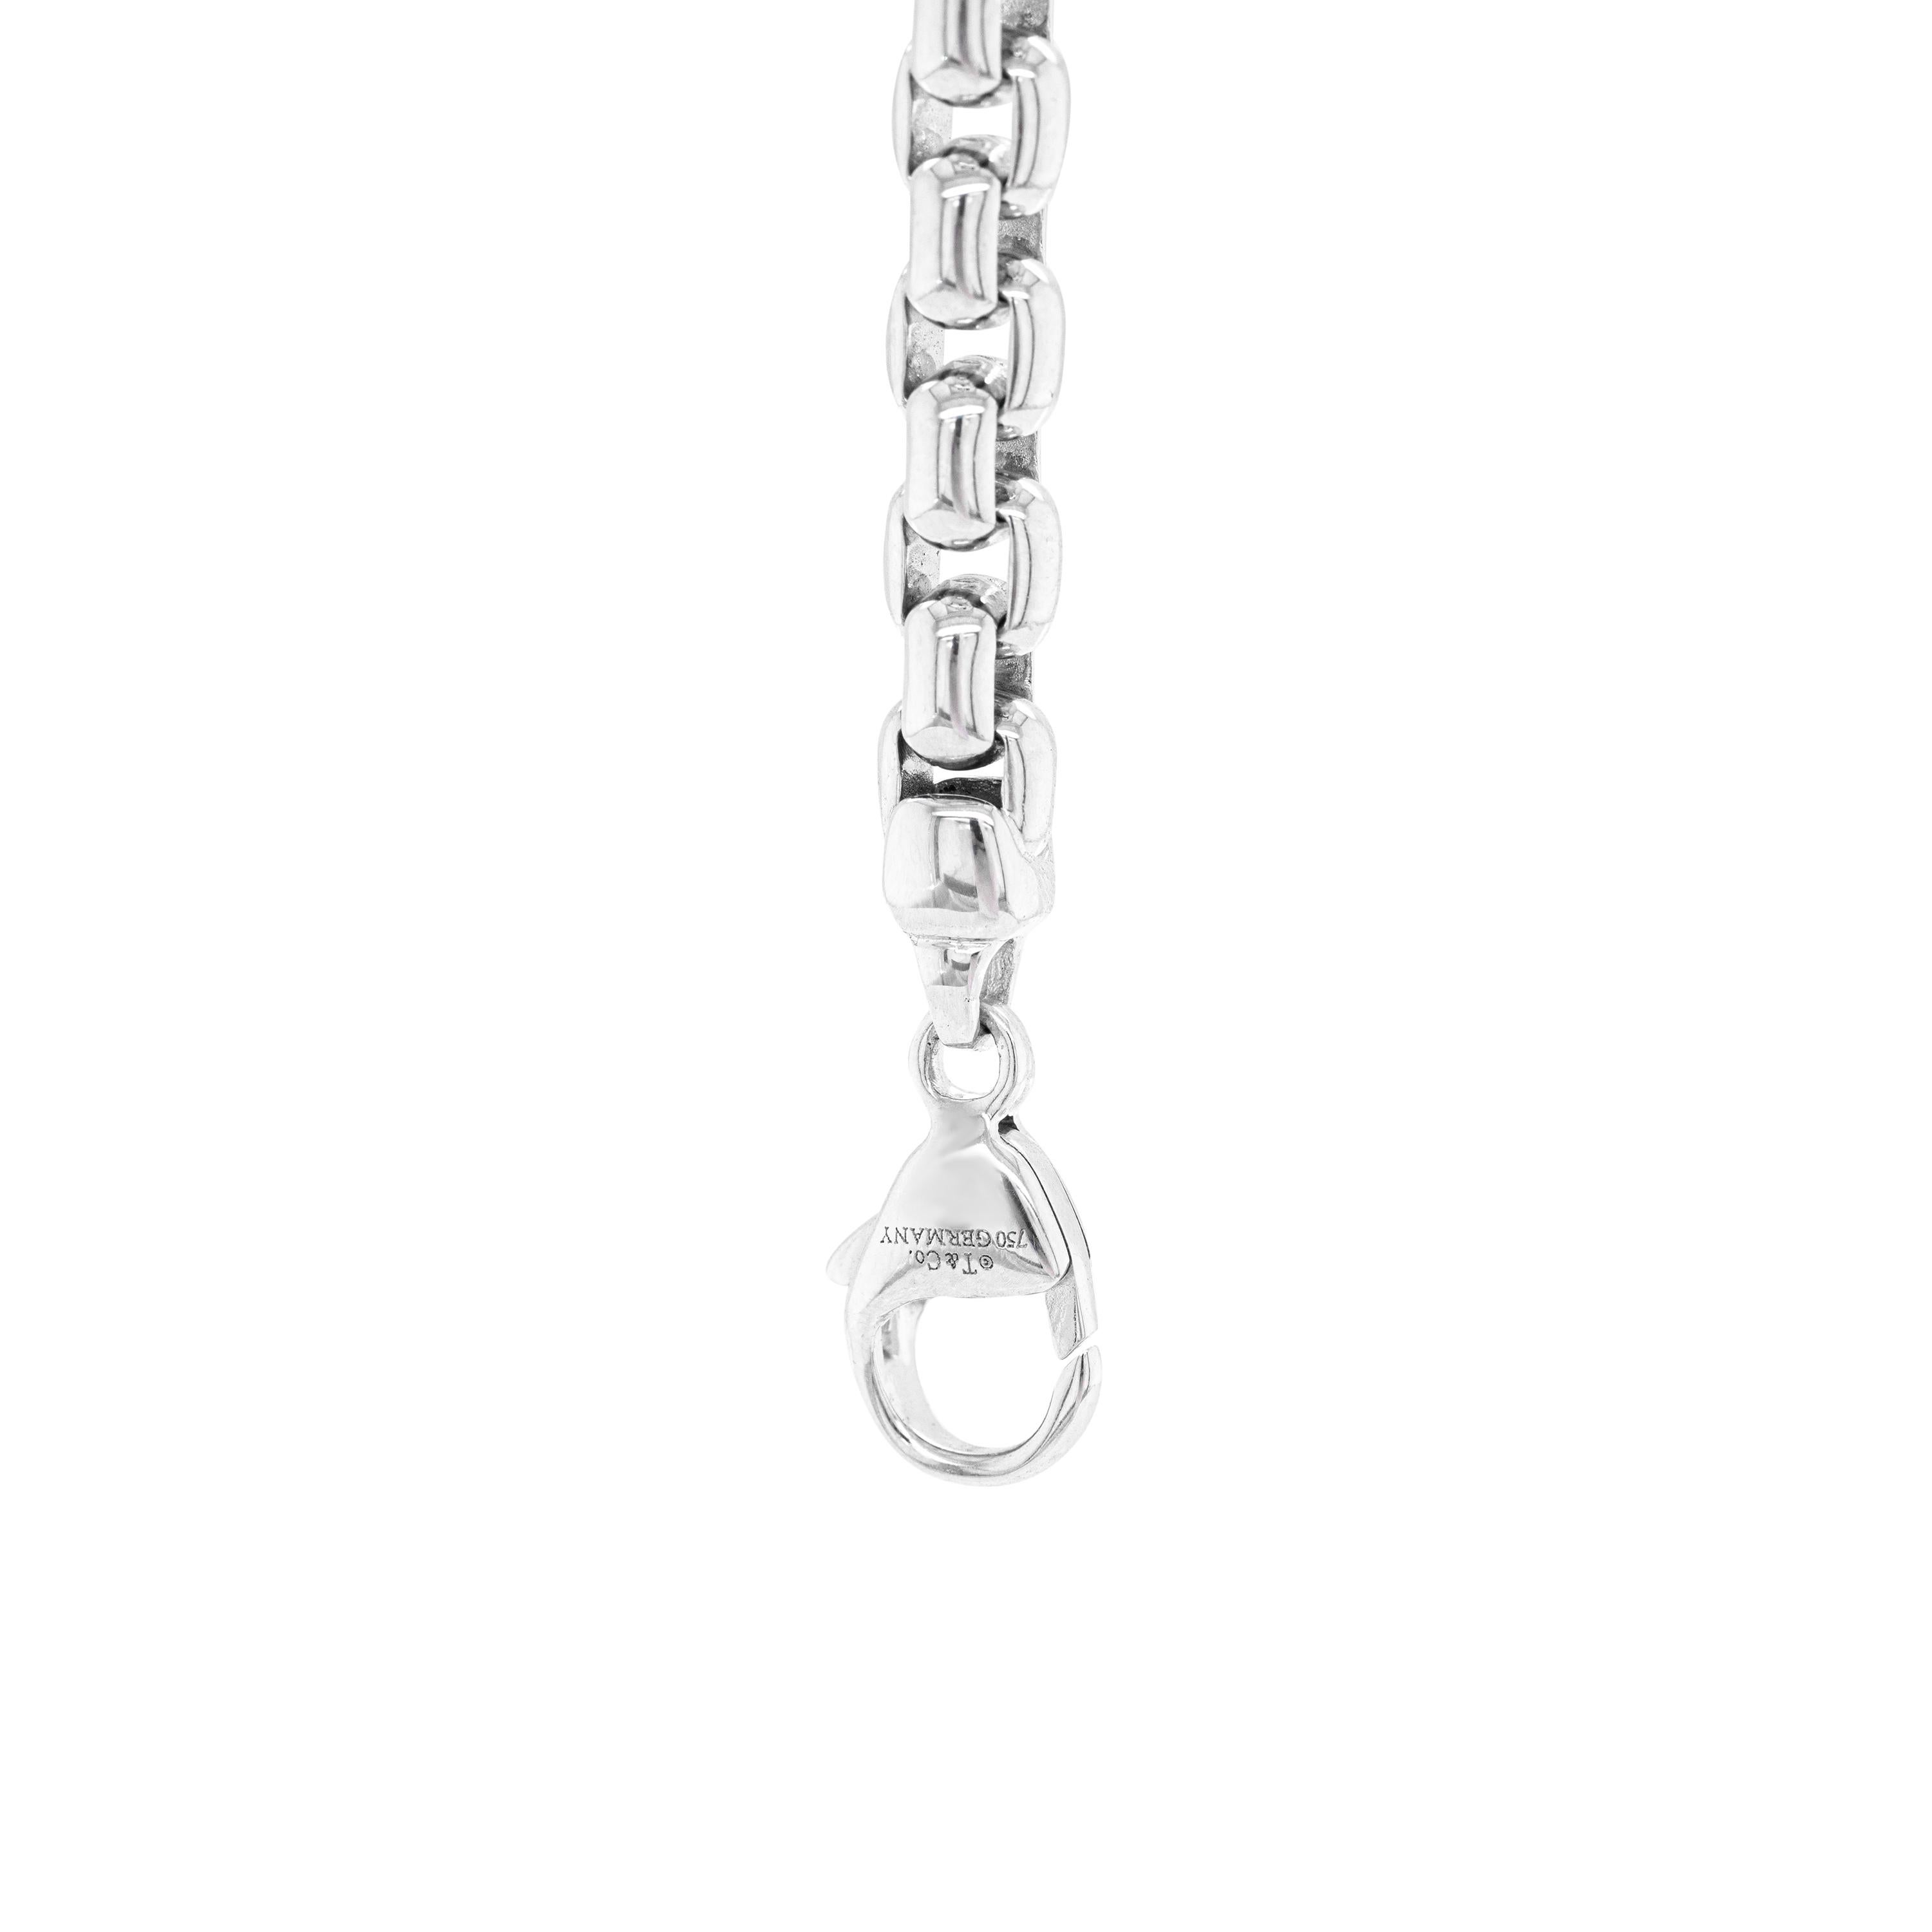 This classic chain bracelet by Tiffany & Co. features a rounded box link design crafted from solid high polish 18 carat white gold. The beautiful bracelet secures with a lobster clasp, measures 8.25